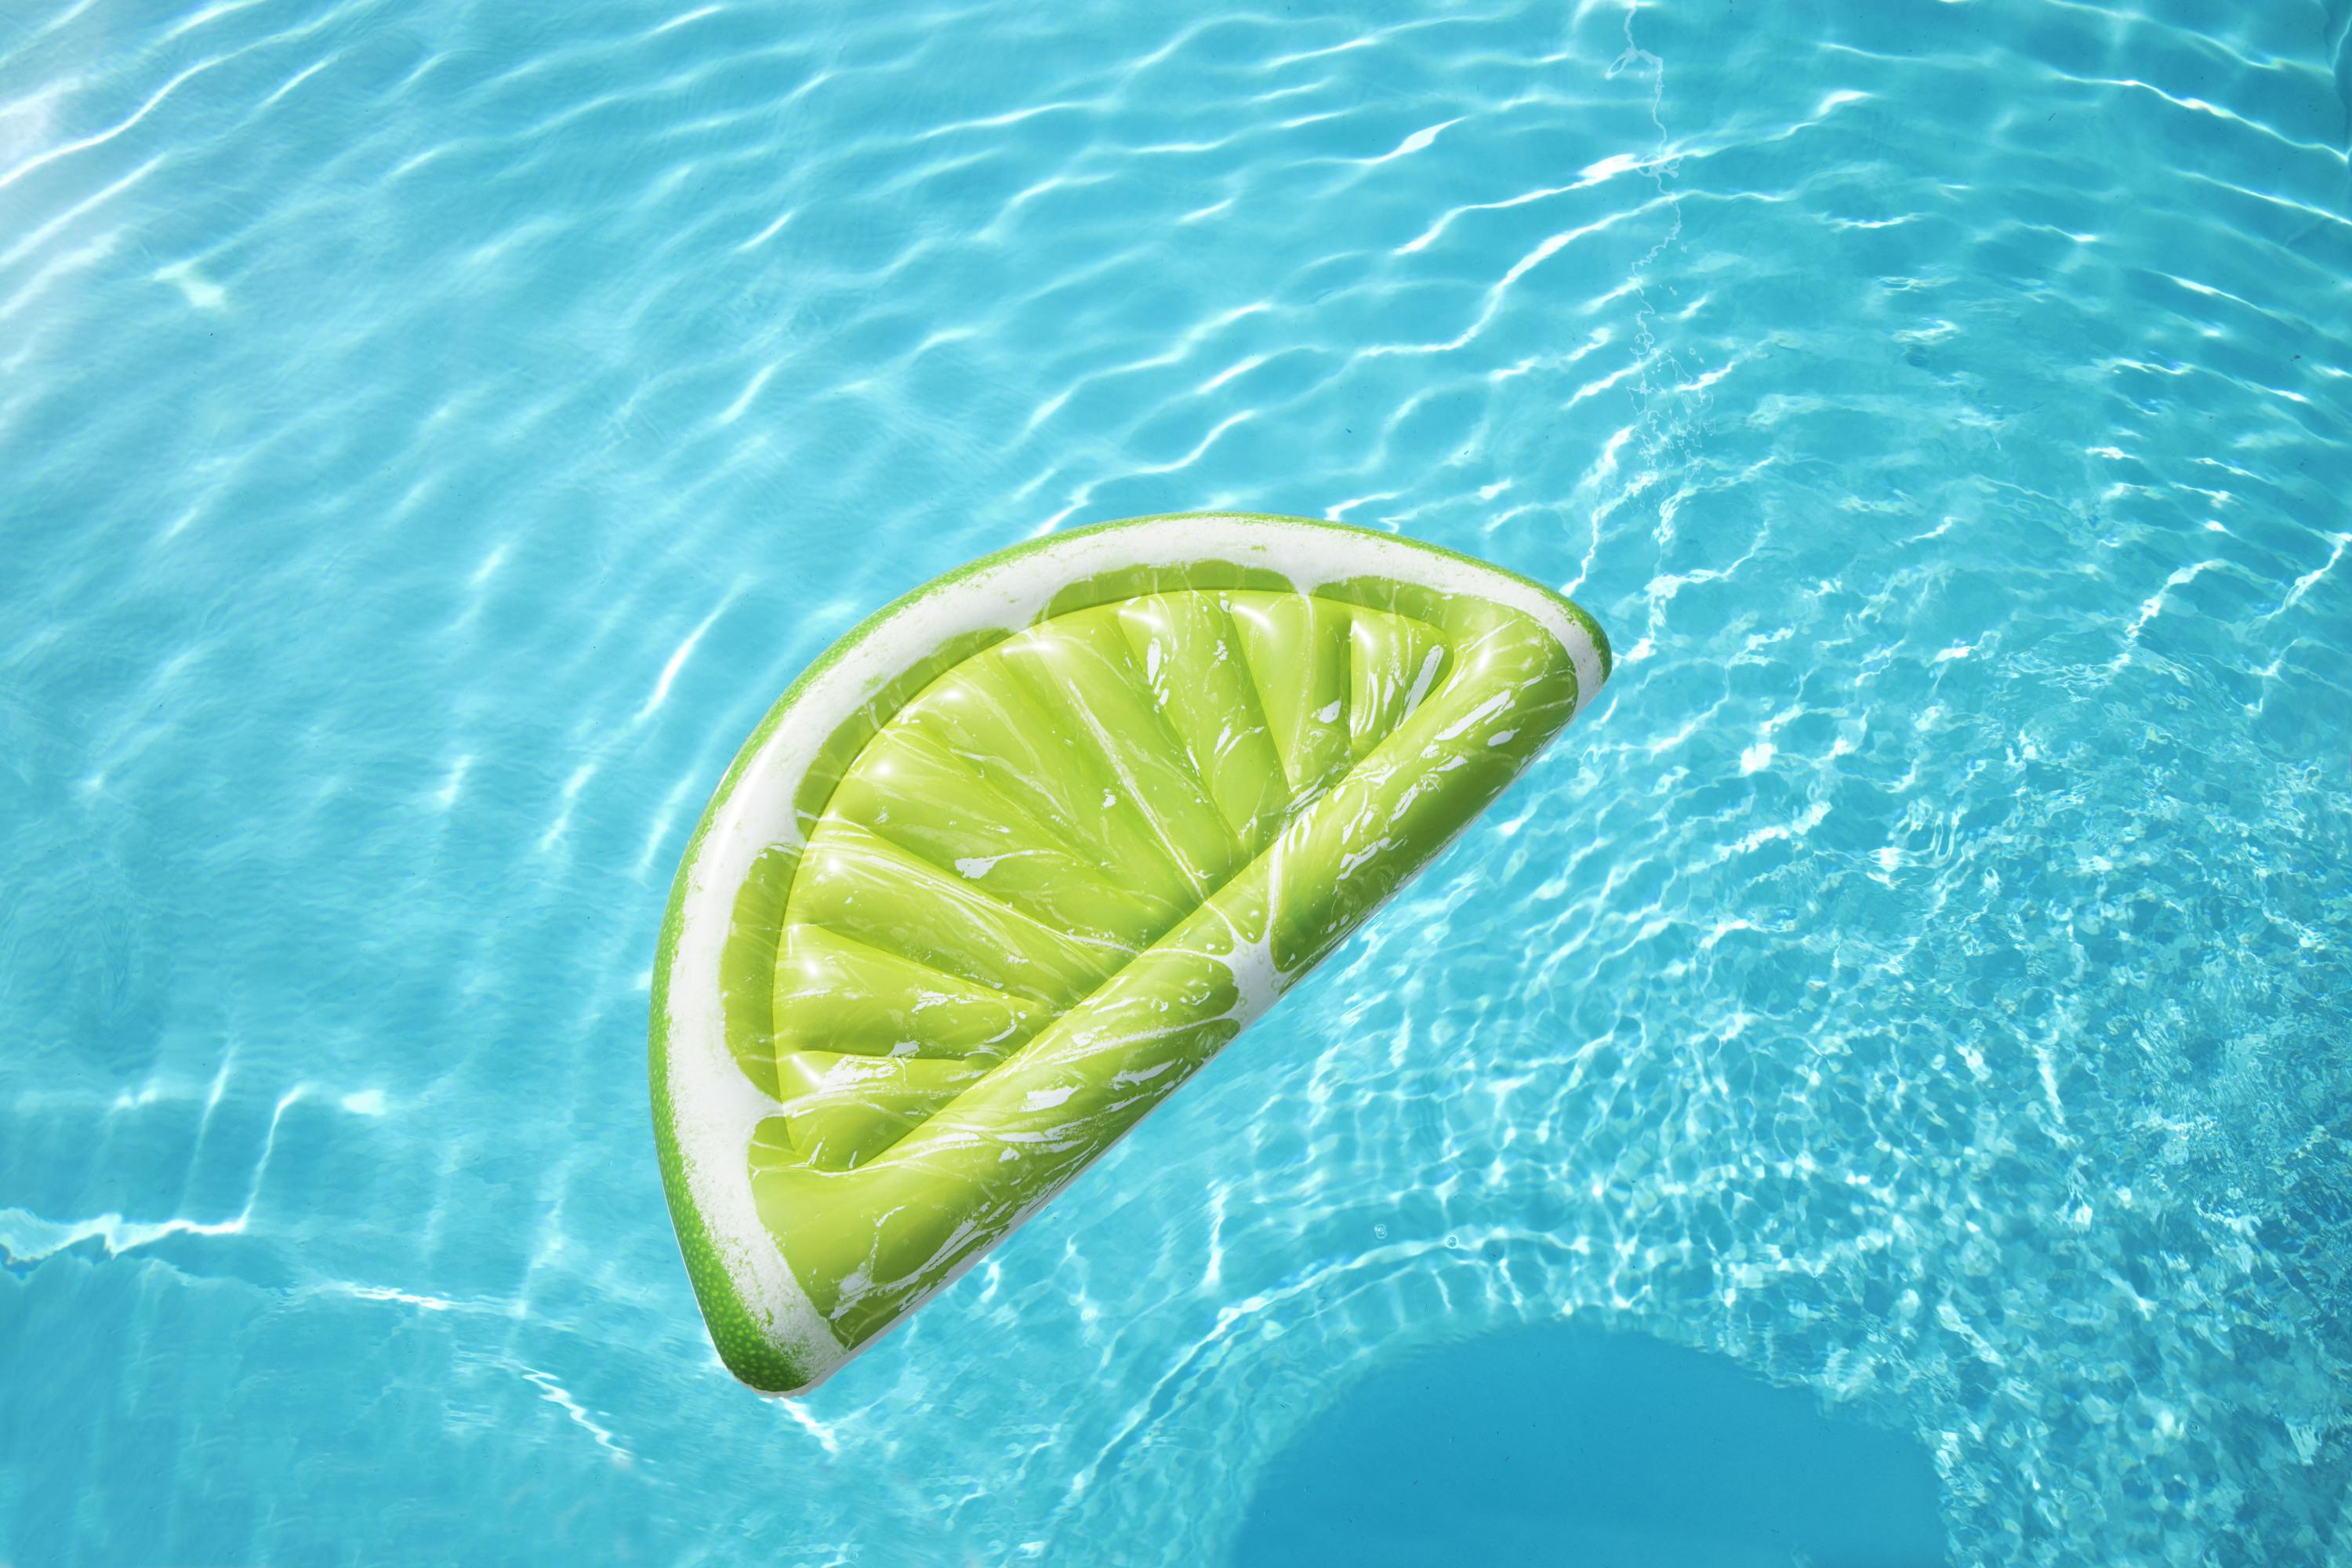 Tropical Lime Pool Float